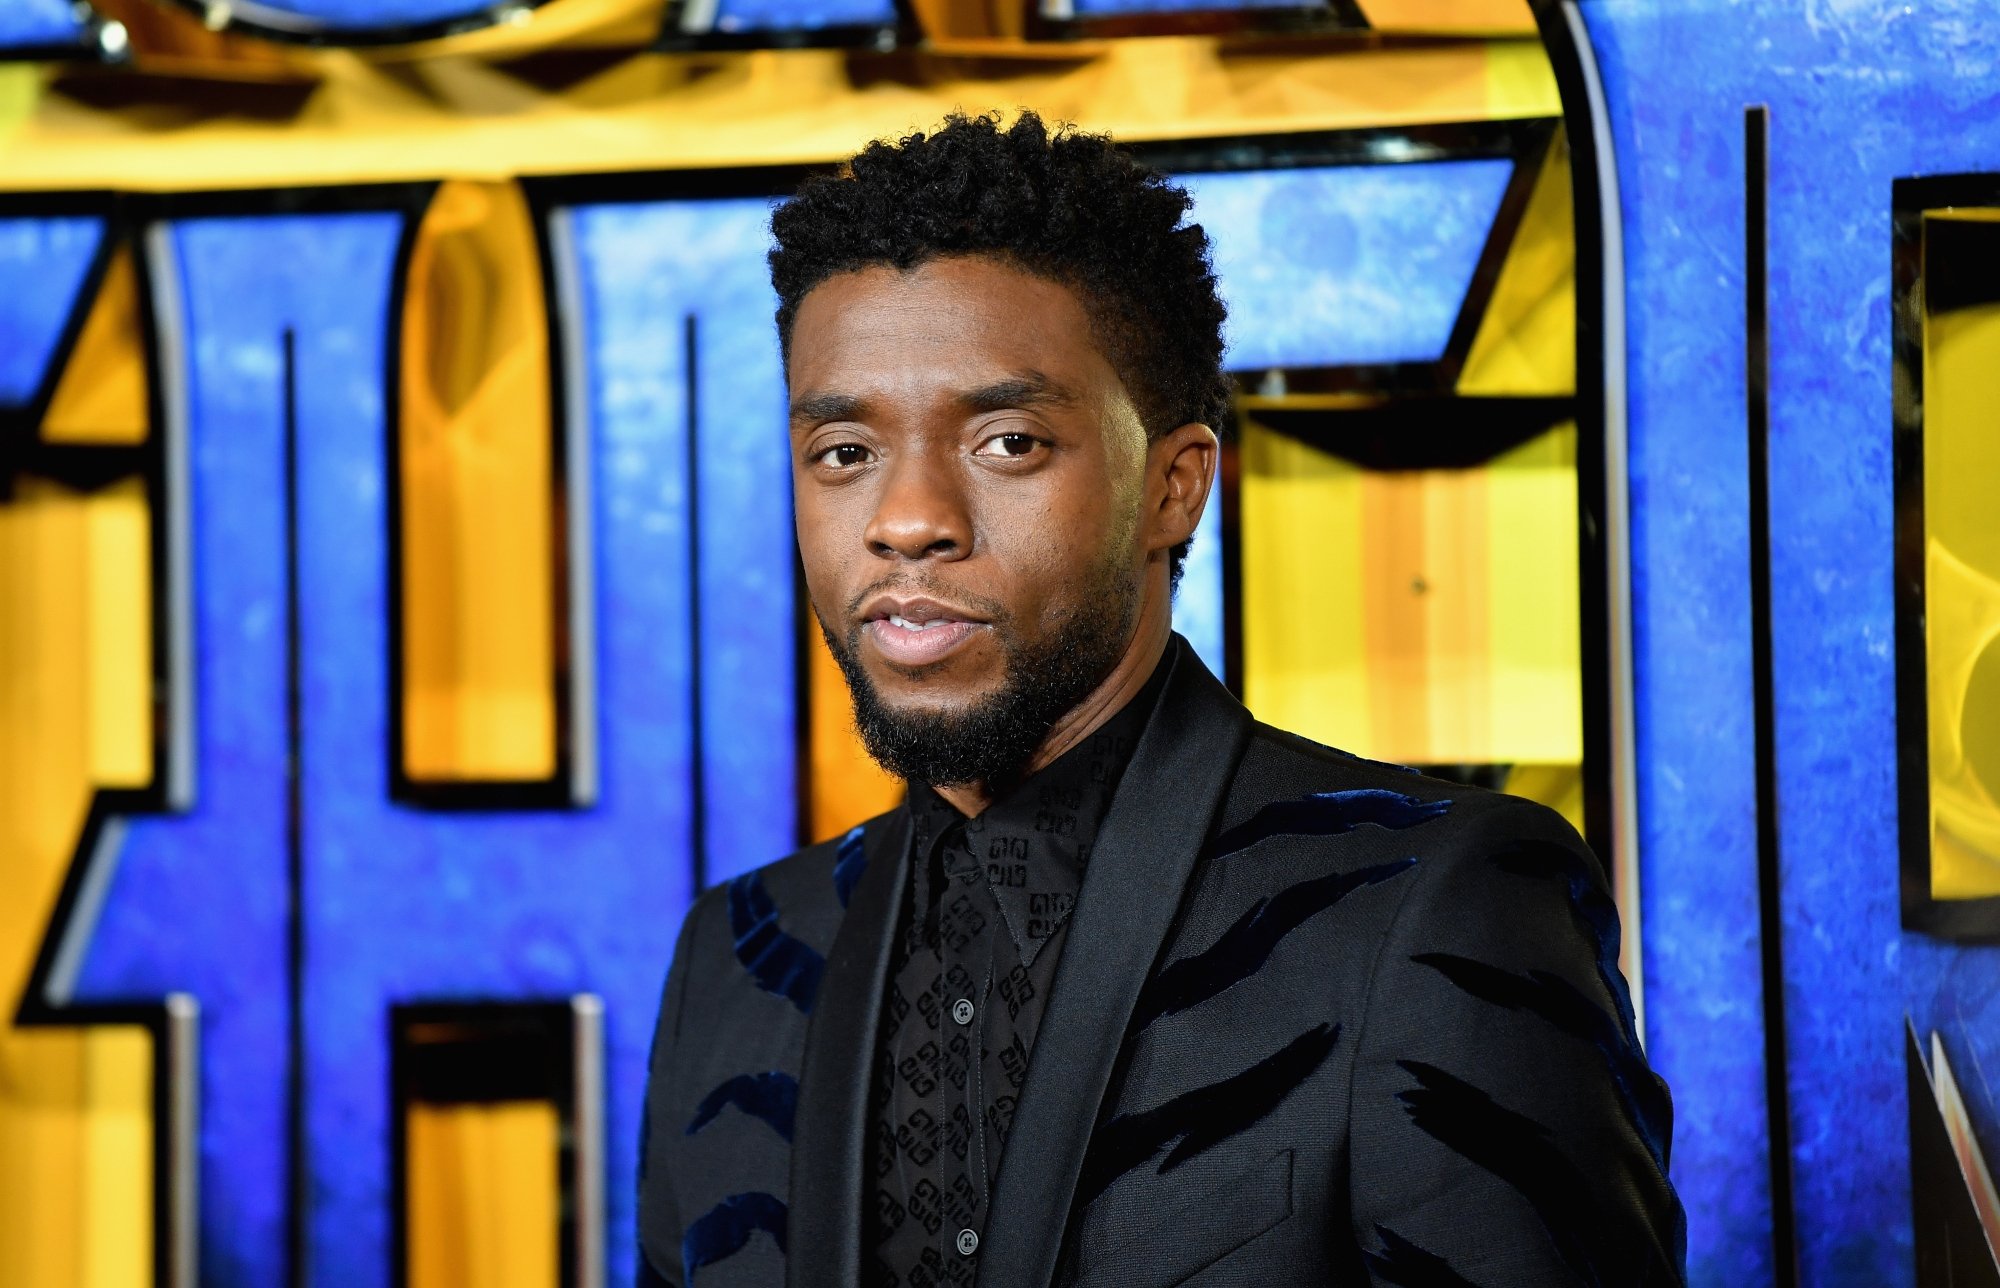 'Black Panther: Wakanda Forever' Chadwick Boseman wearing an all-black suit standing in front of the 'Black Panther' title logo